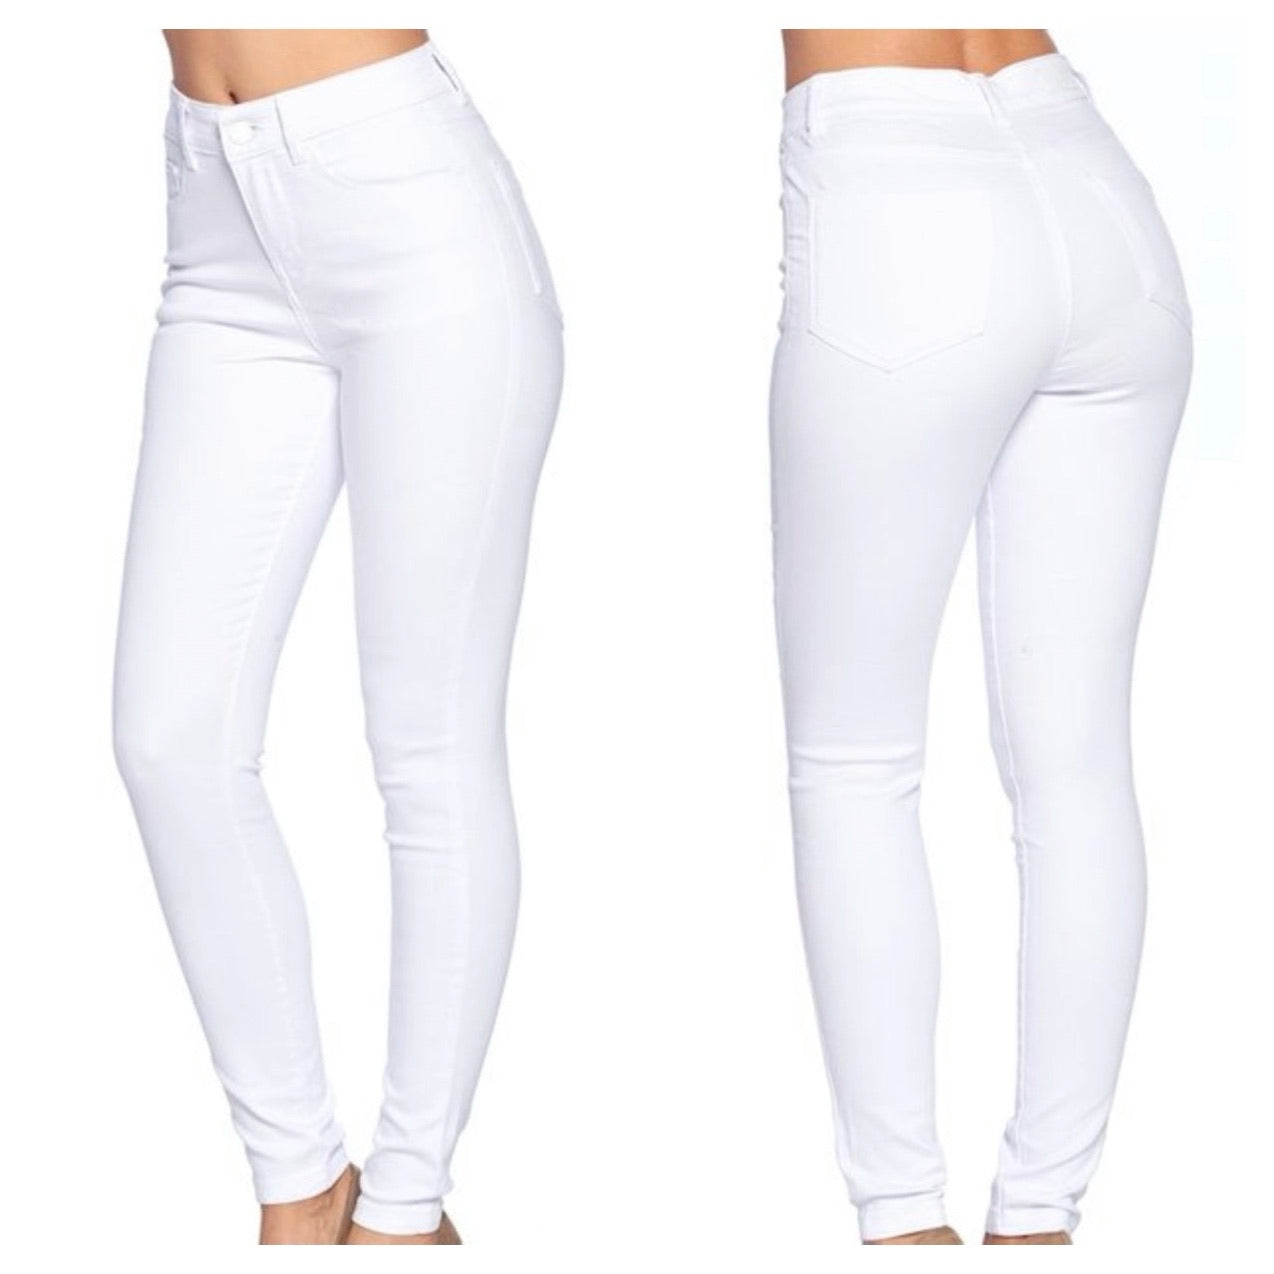 Level Up High Waisted White Jeans (1,3,5,9,11)